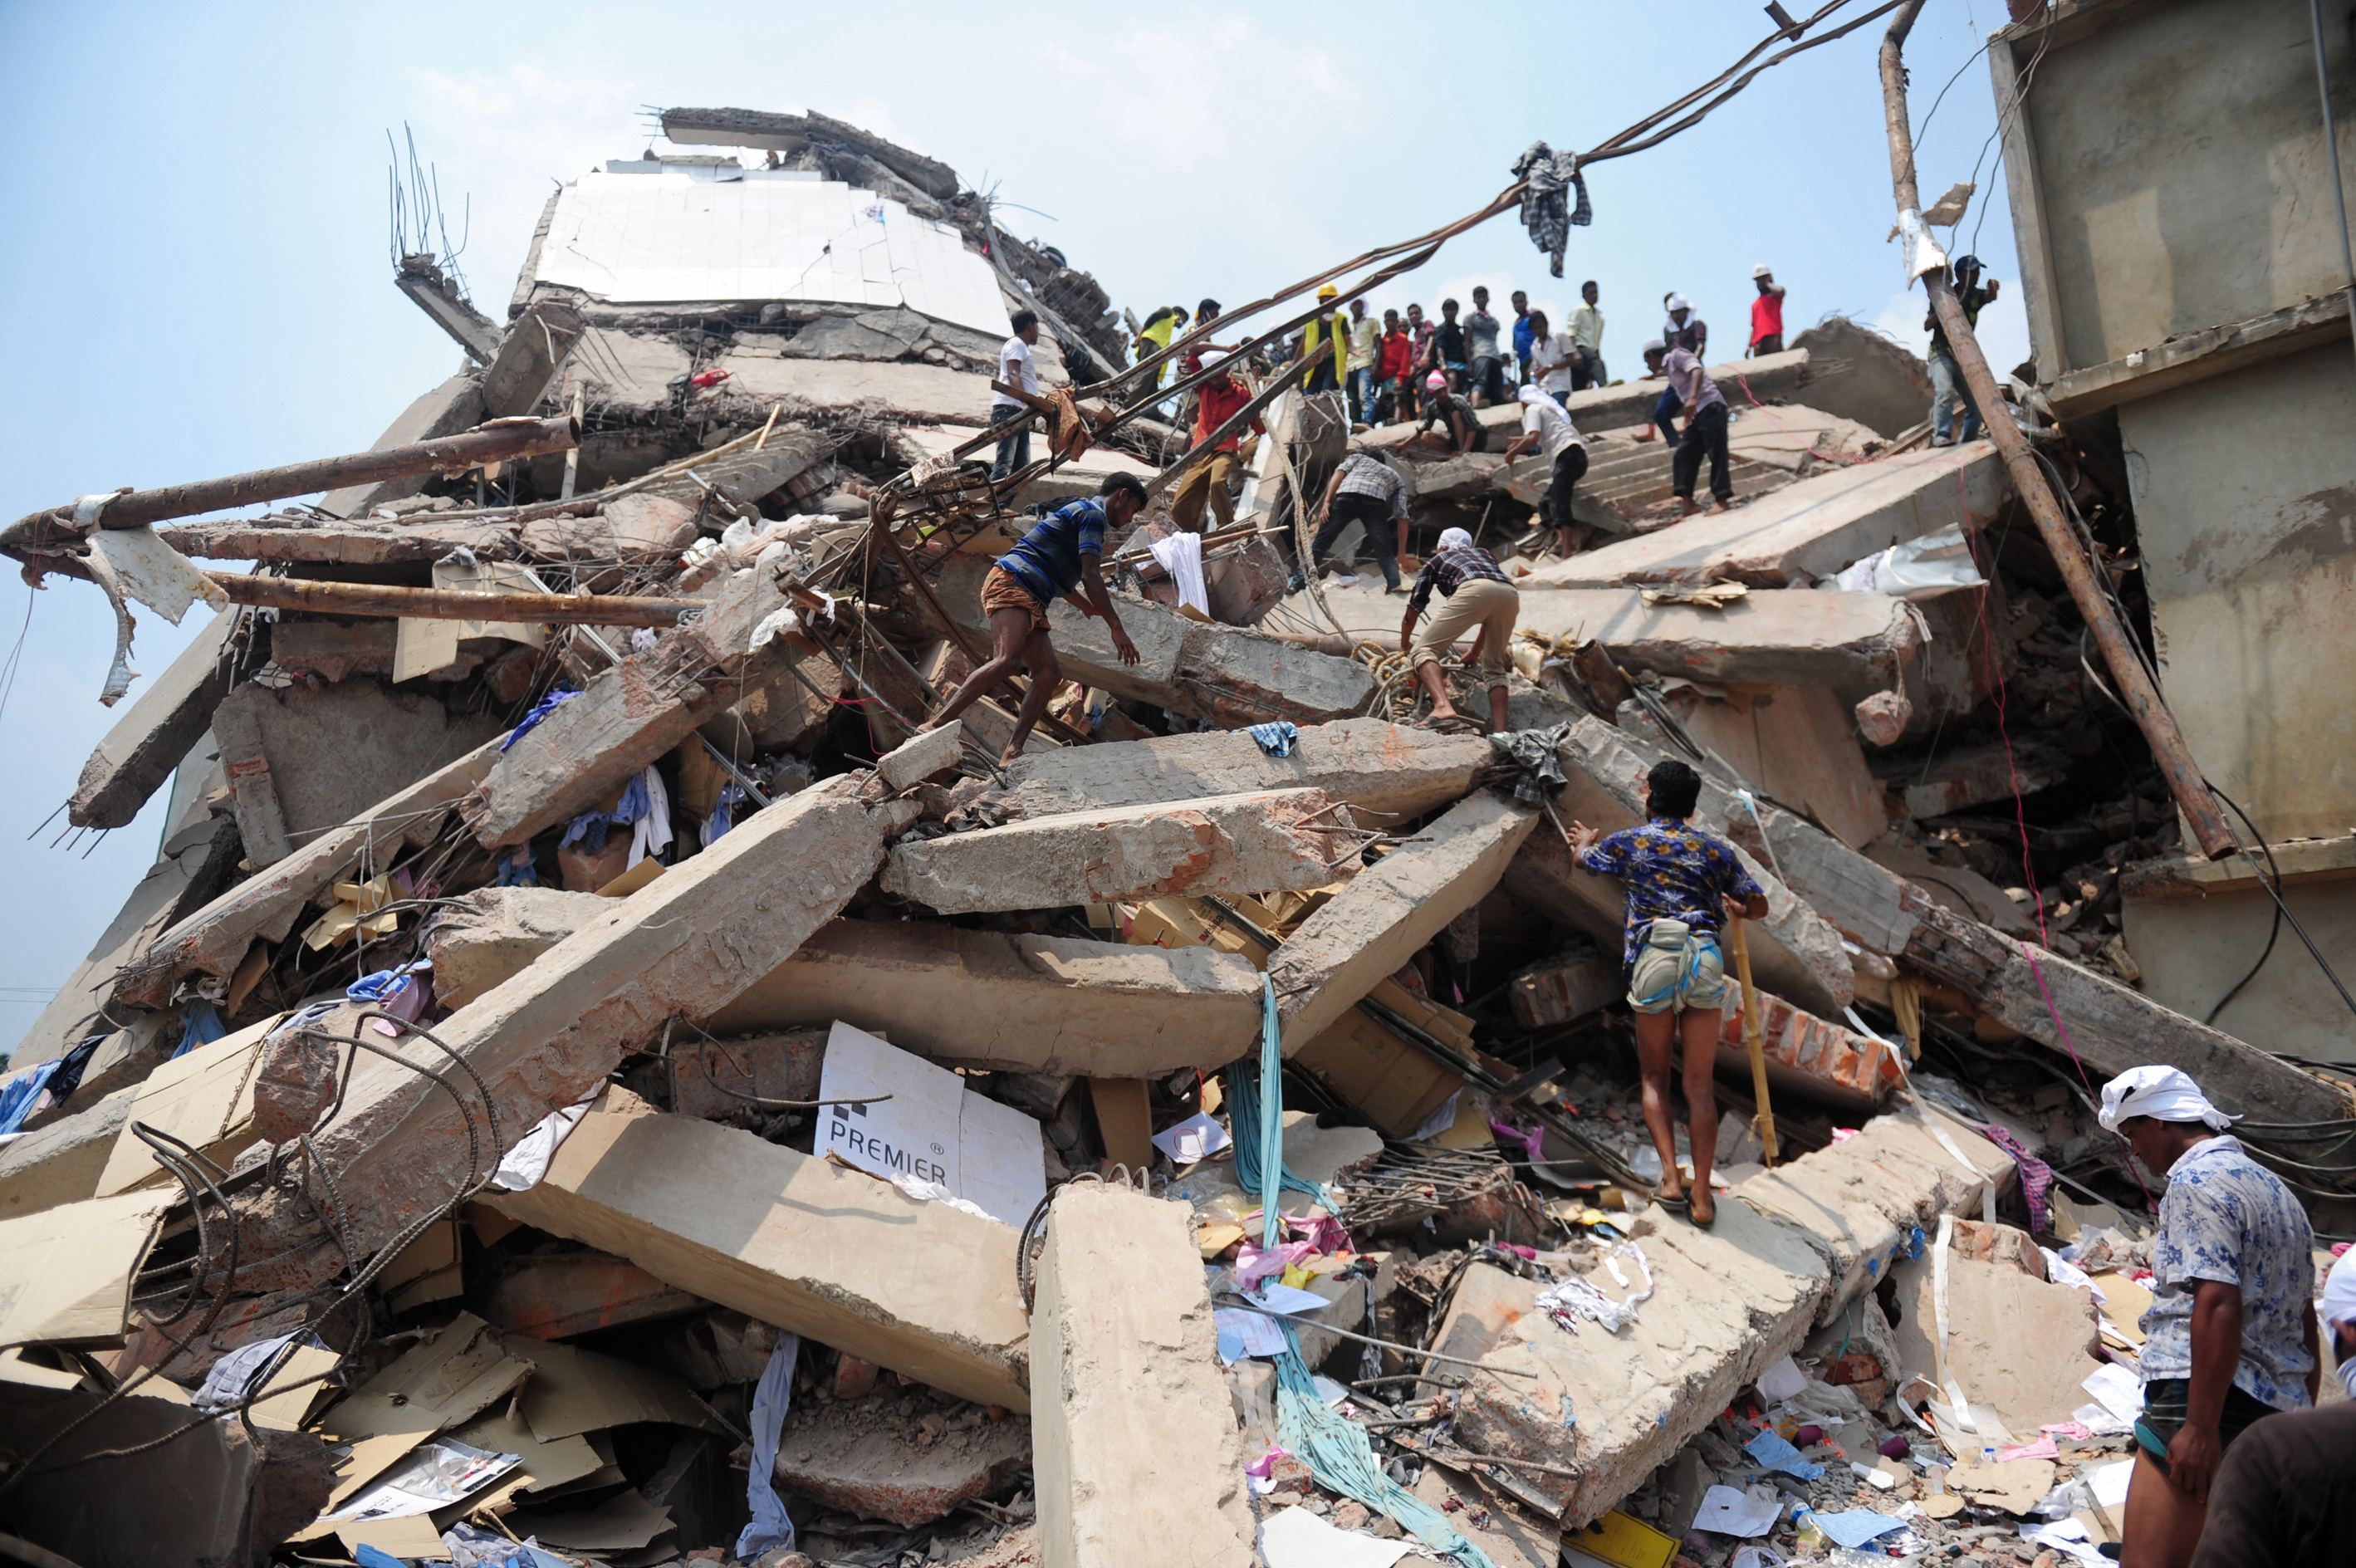 Bangladesh garment factory owners warned to evacuate before collapse